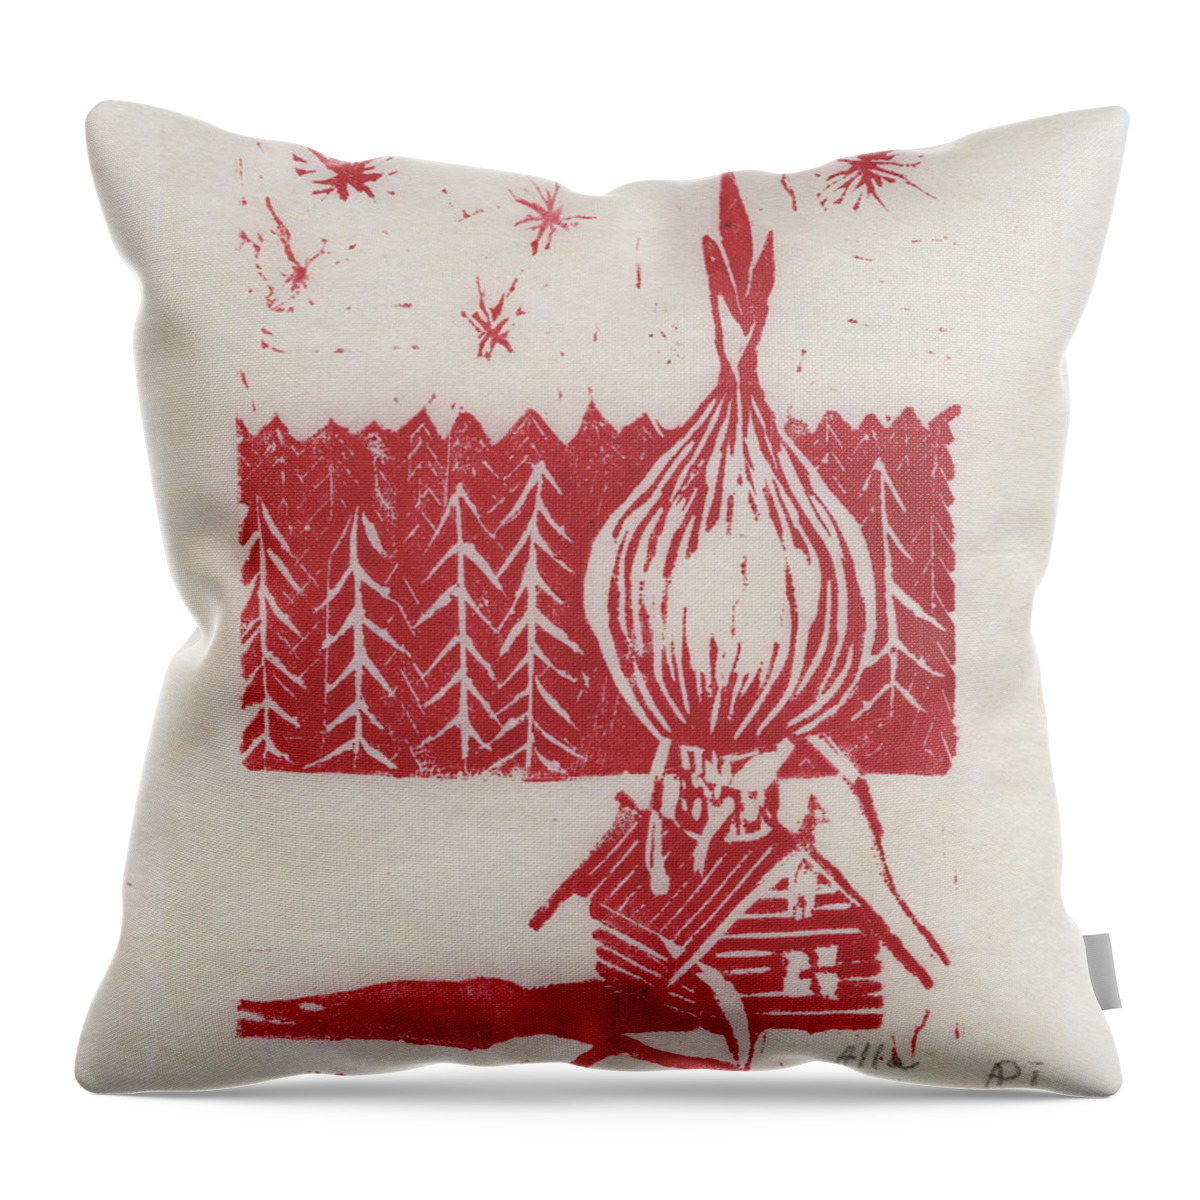 Onion Throw Pillow featuring the mixed media Onion Dome by Alla Parsons